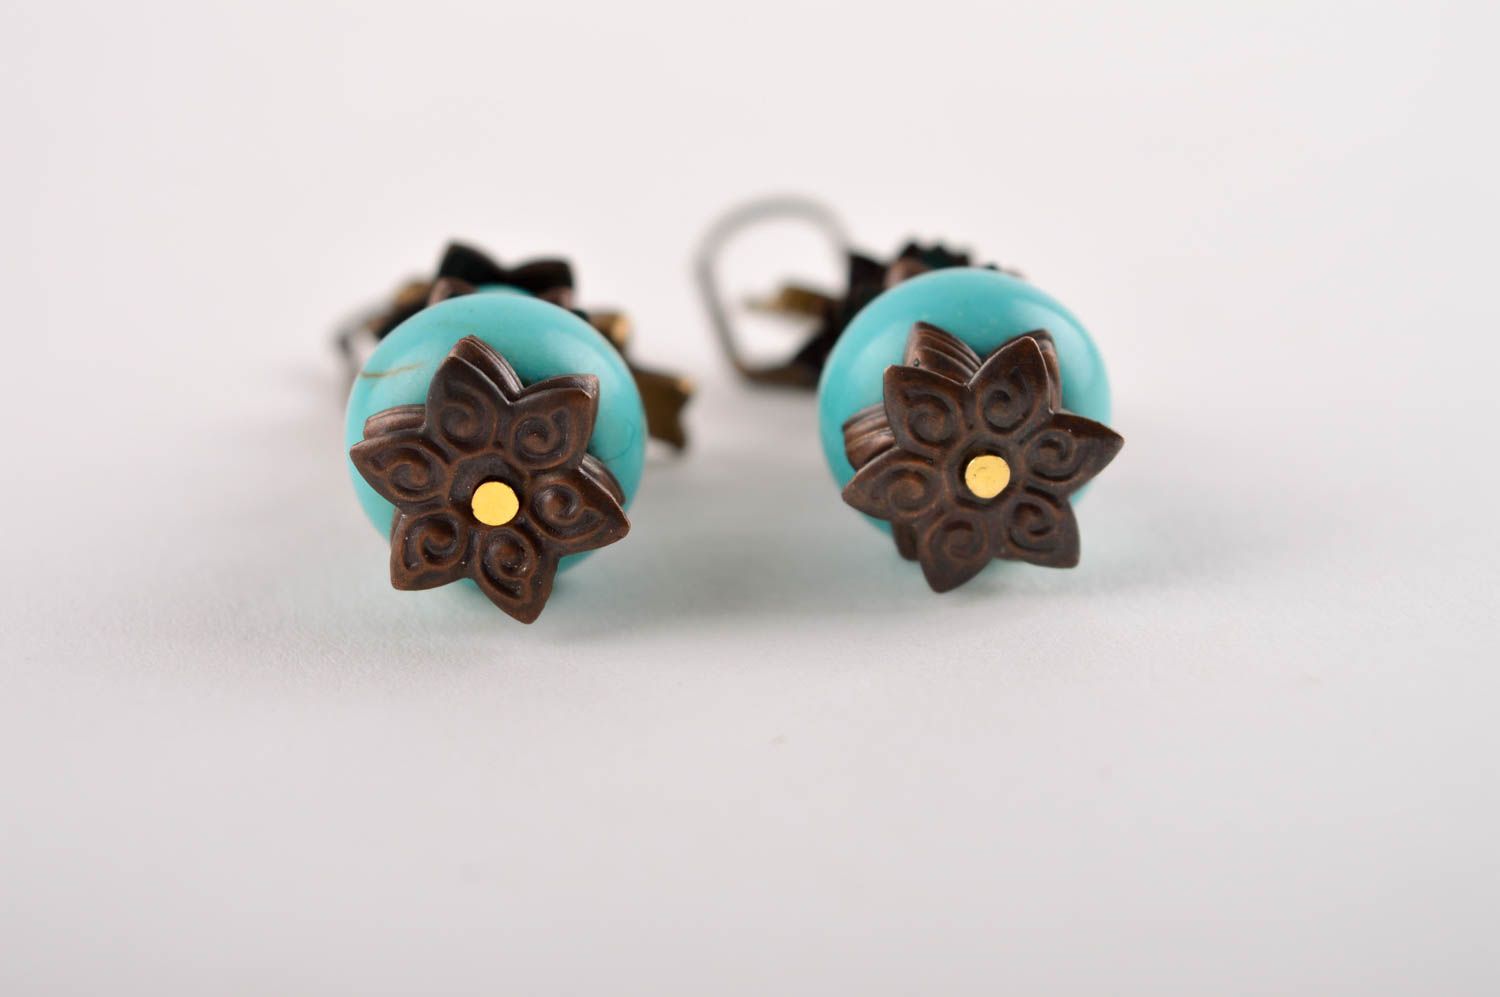 Homemade jewelry designer earrings turquoise earrings cool jewelry gifts for her photo 4